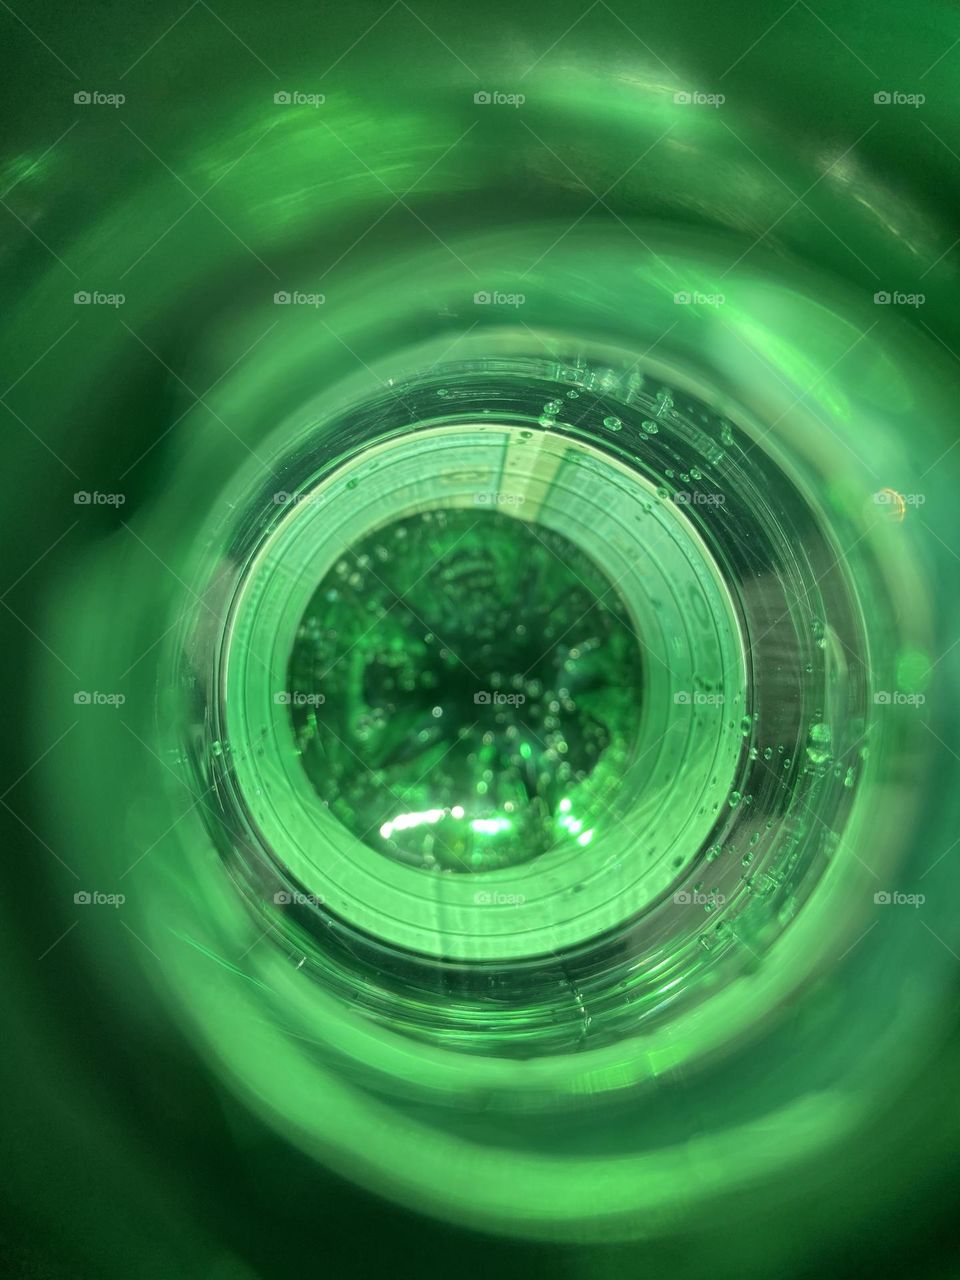 A shot of the inside of a San Pellegrino water bottle while quenching my thirst and playing around on a recent hot summer day. Sparking water and brilliant green  capture the spirit of summer. 